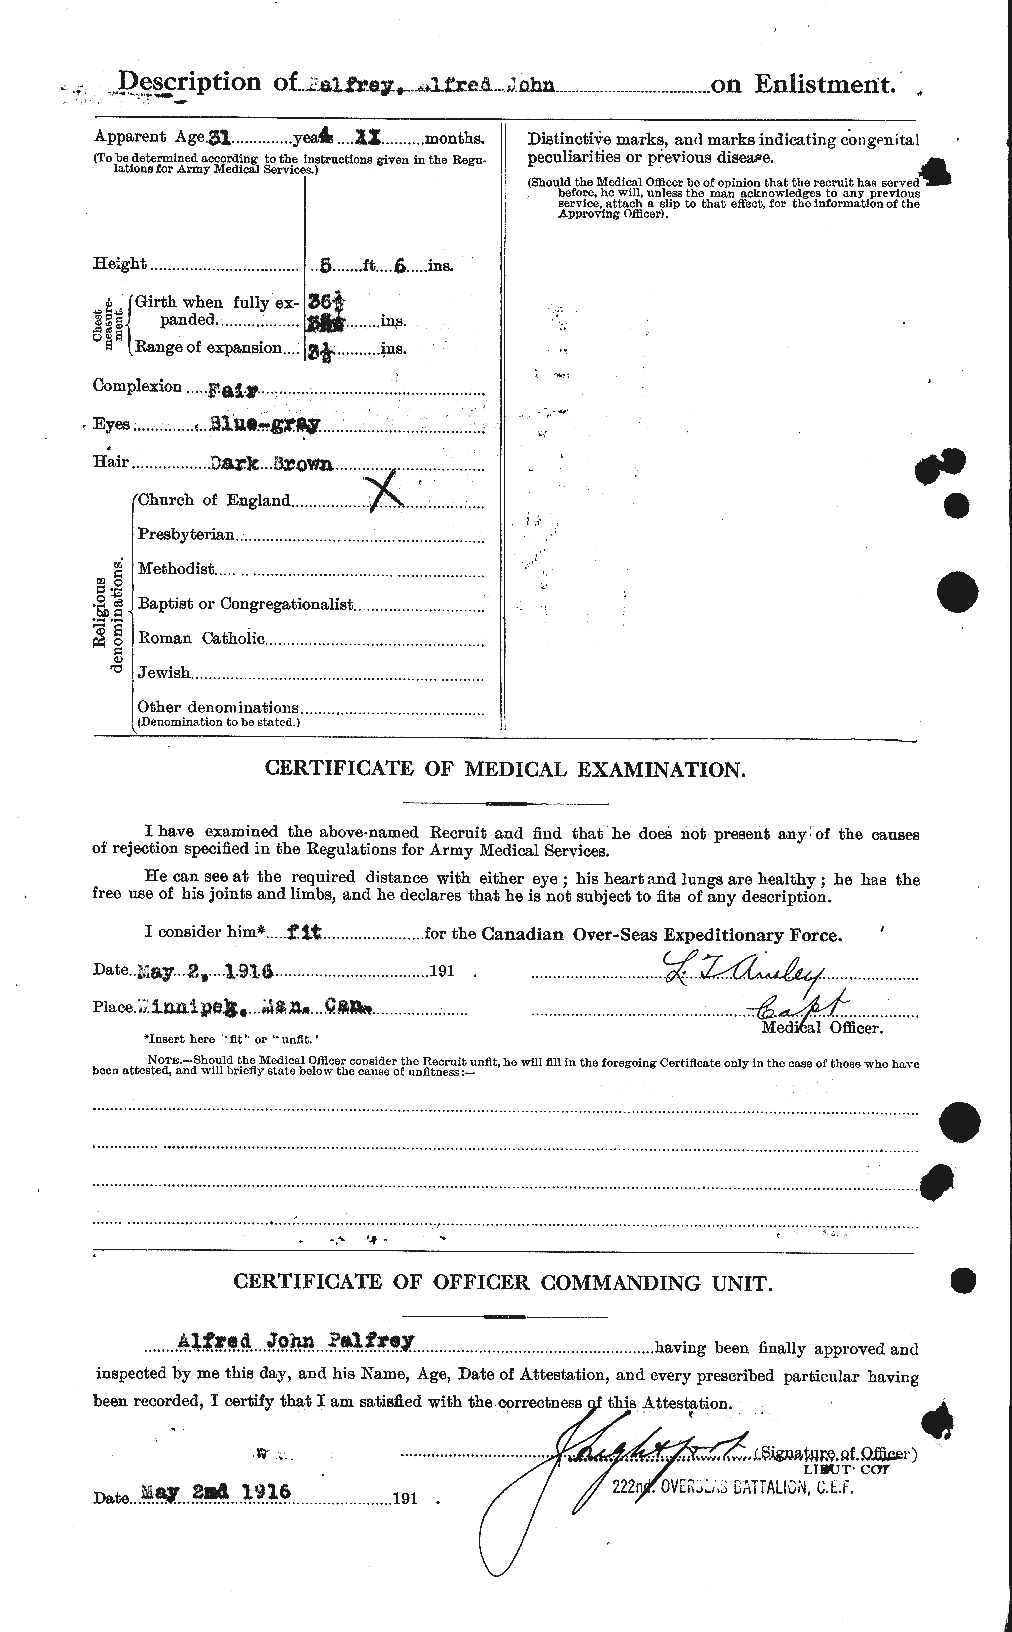 Personnel Records of the First World War - CEF 562627b